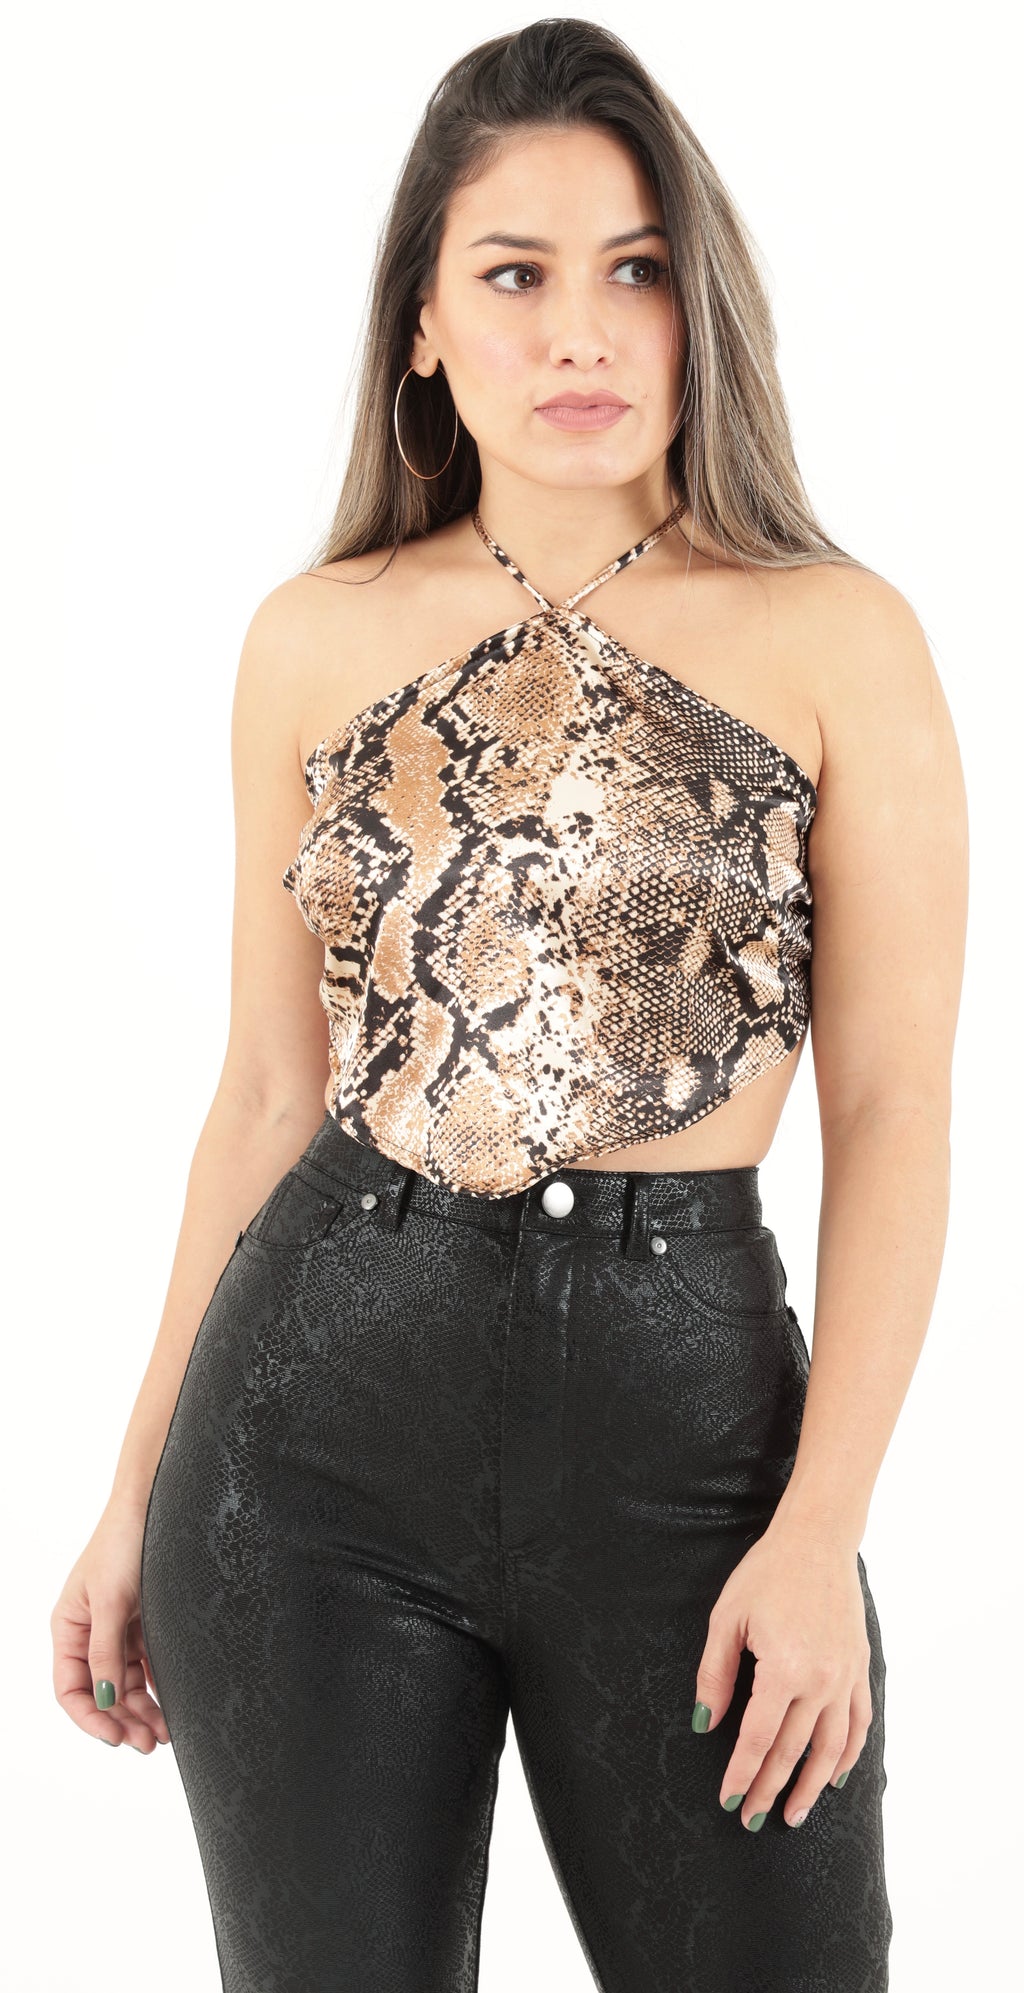 Fircely in Love Snake Print Satin Crop Top